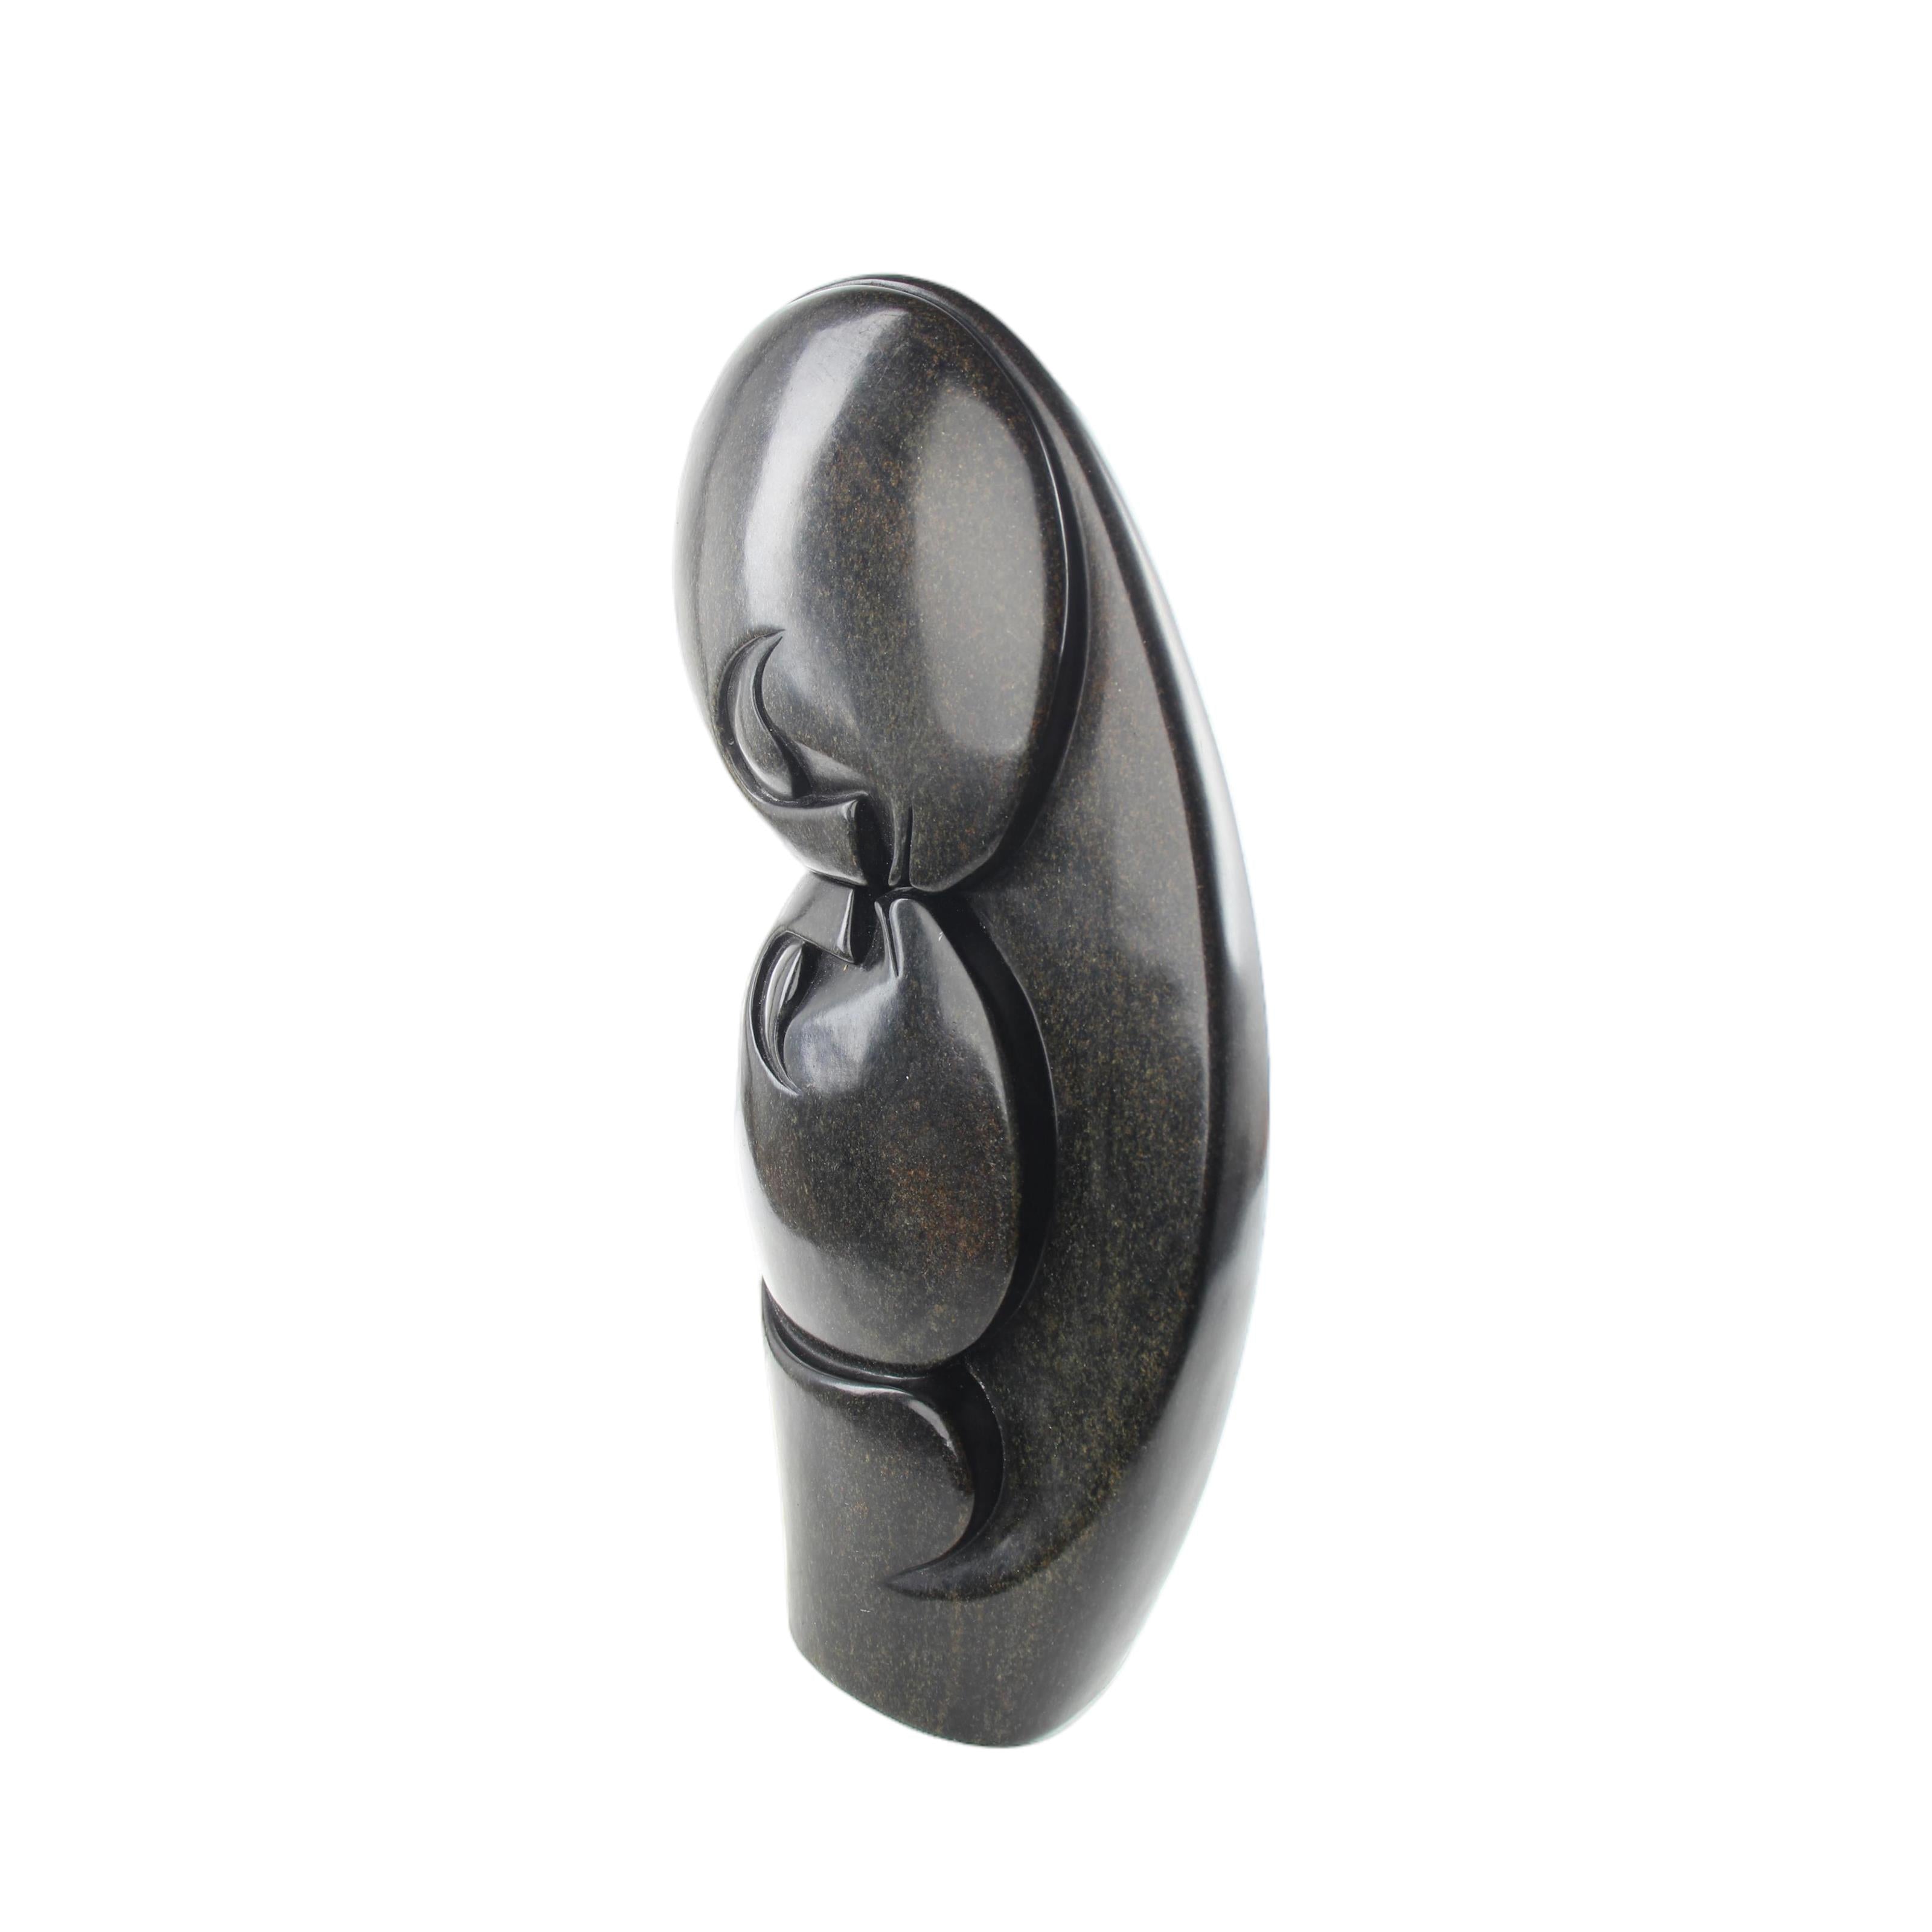 Shona Tribe Serpentine Stone Lovers ~15.7" Tall - Lovers